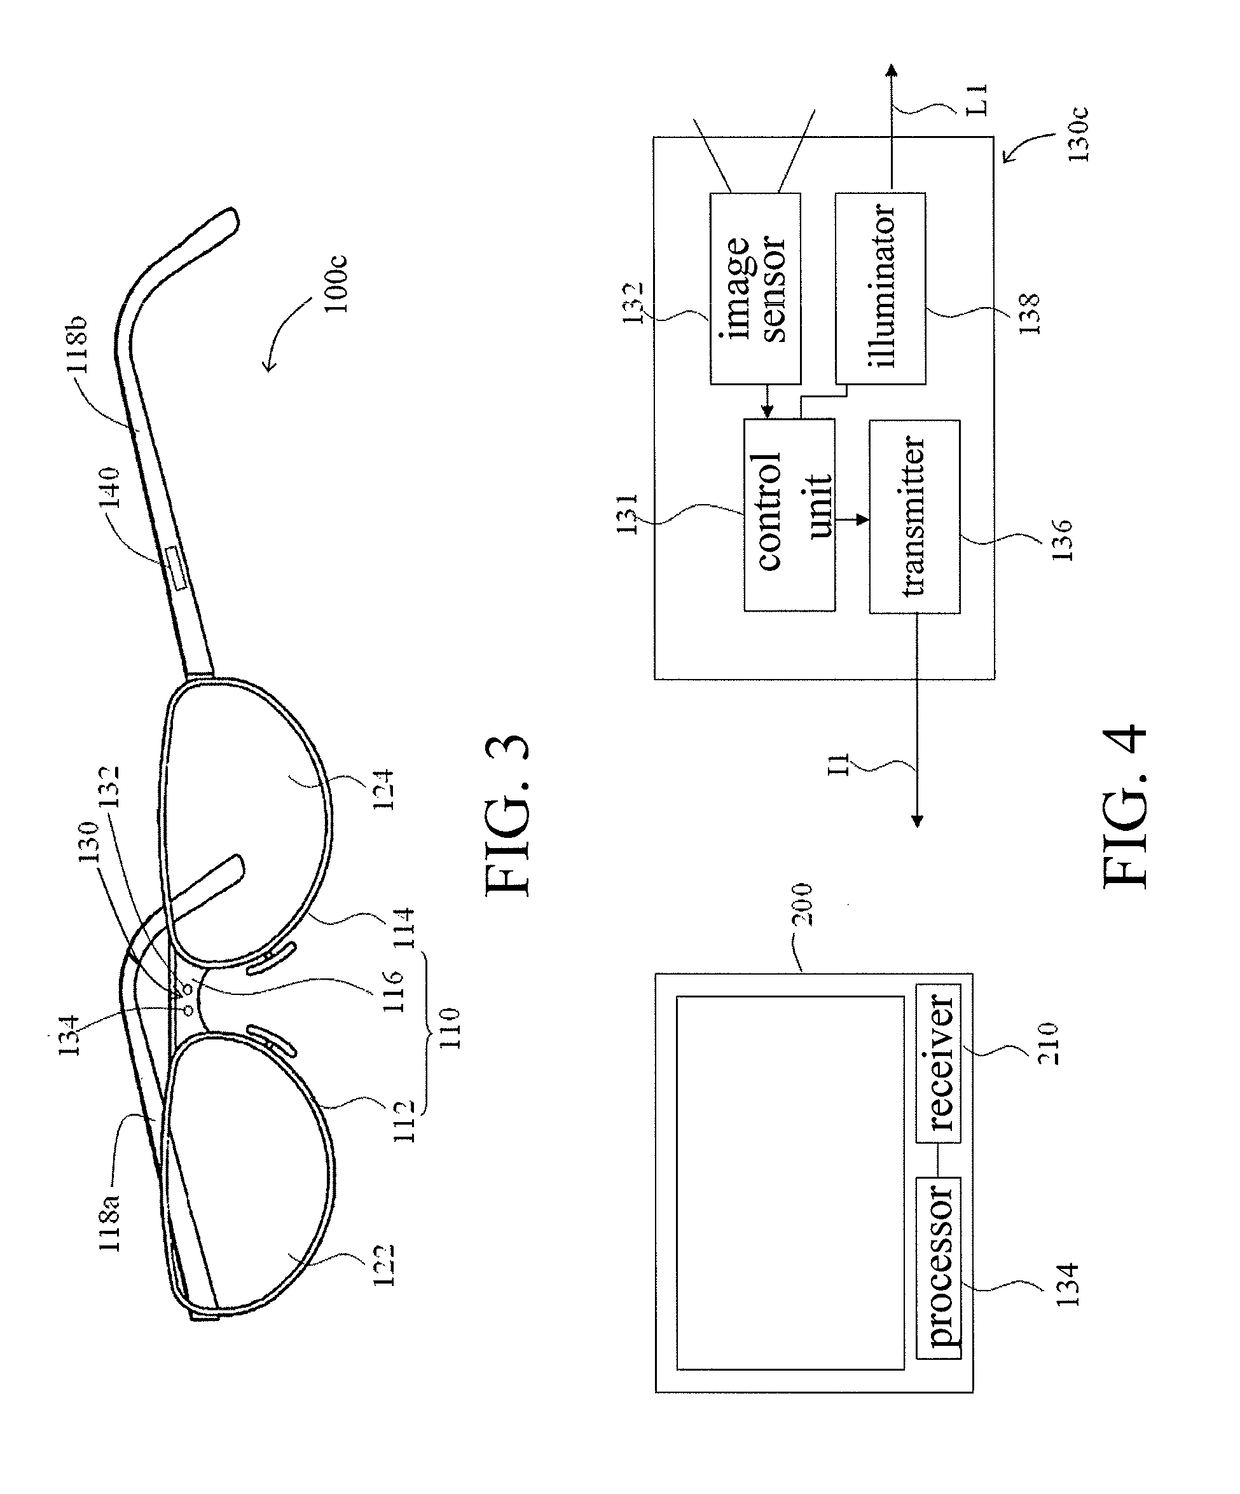 Gesture recognition system and glasses with gesture recognition function